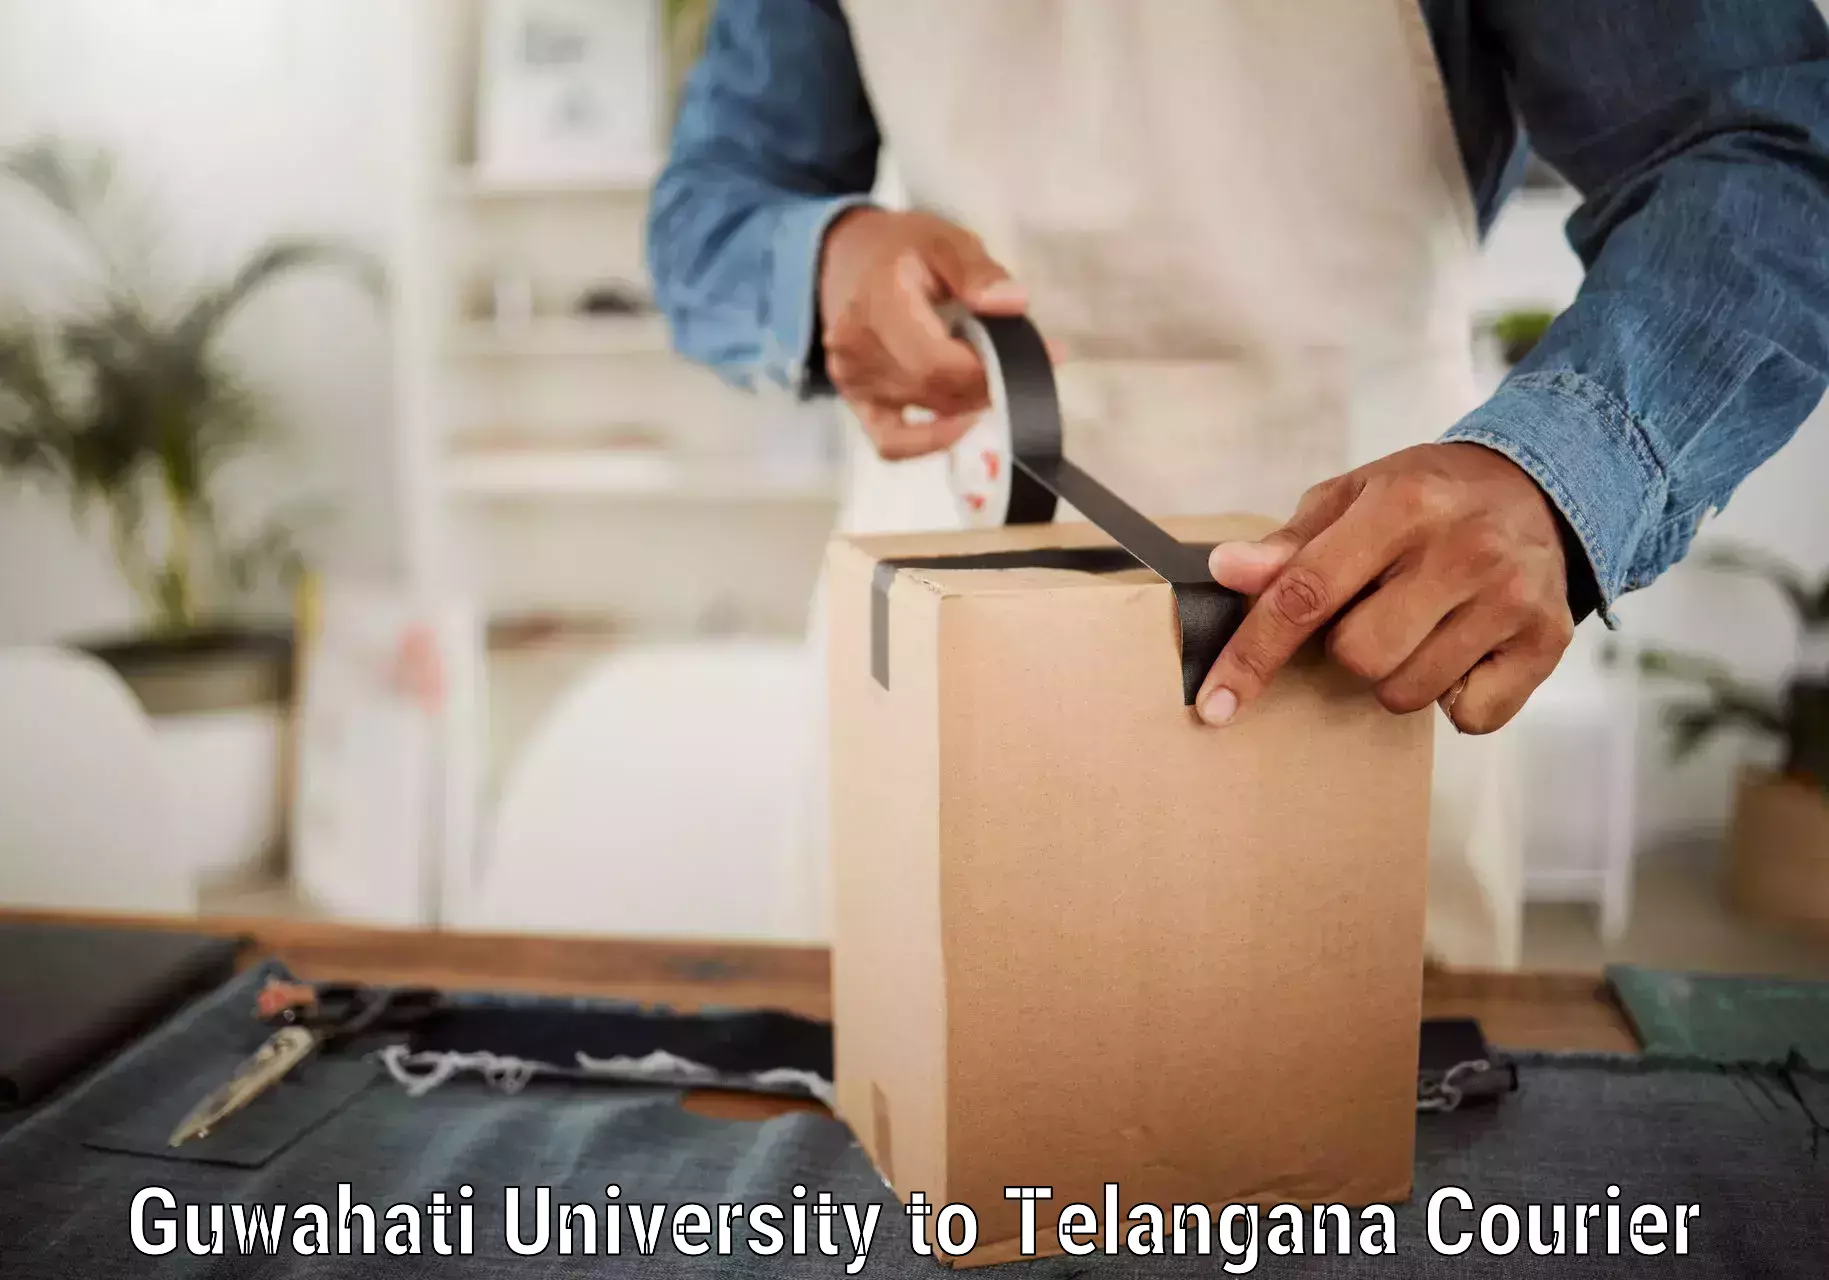 Secure freight services Guwahati University to Cheyyur